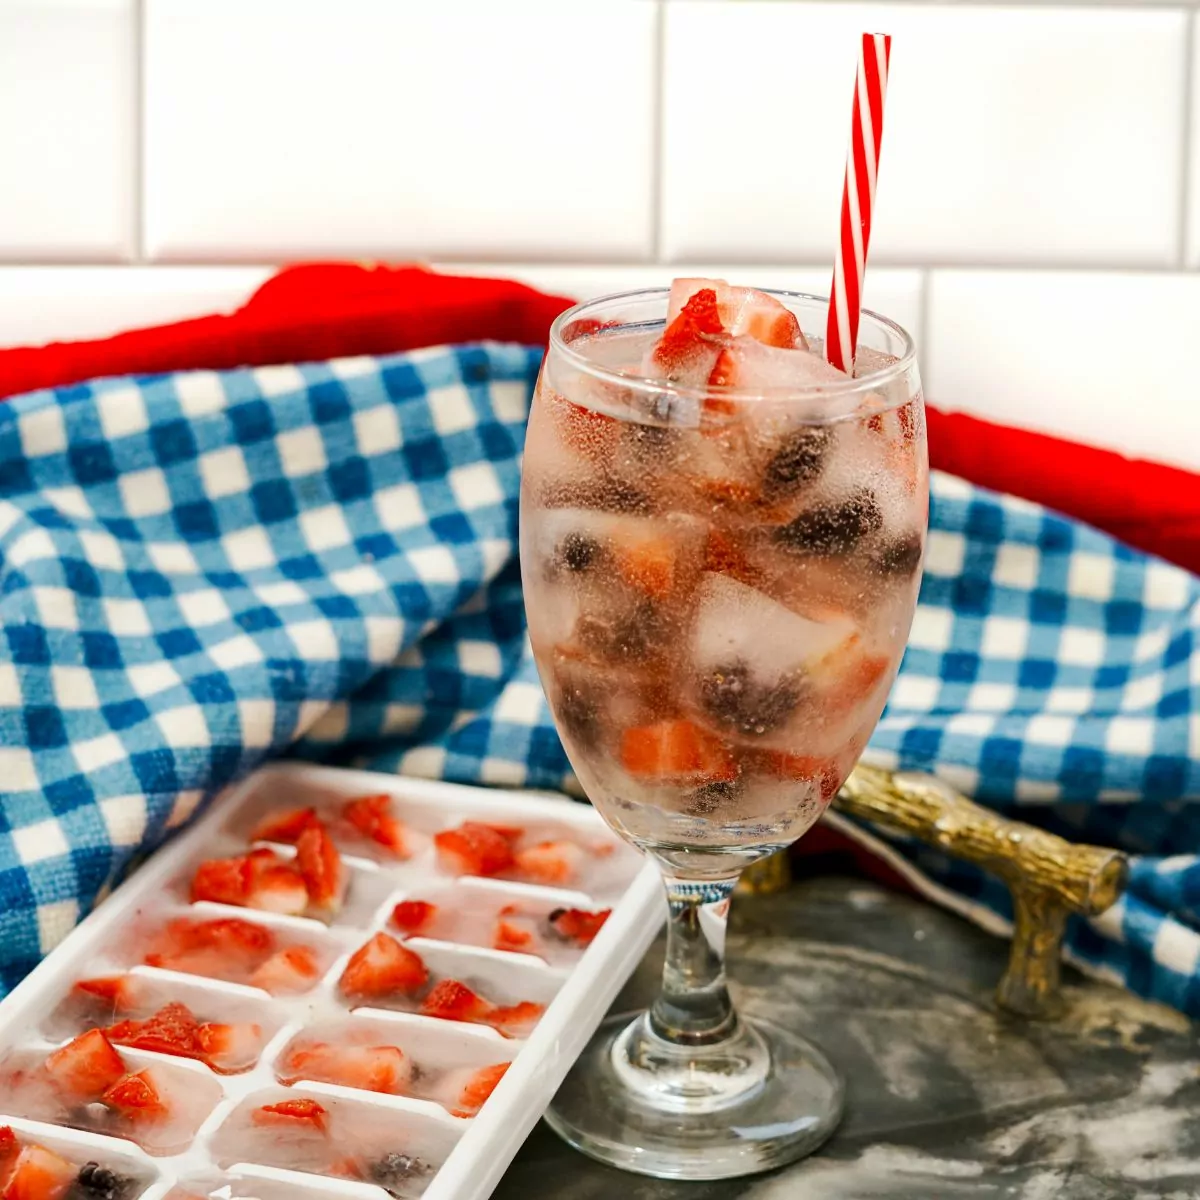 blue gingham cloth with beverage and ice cube tray.